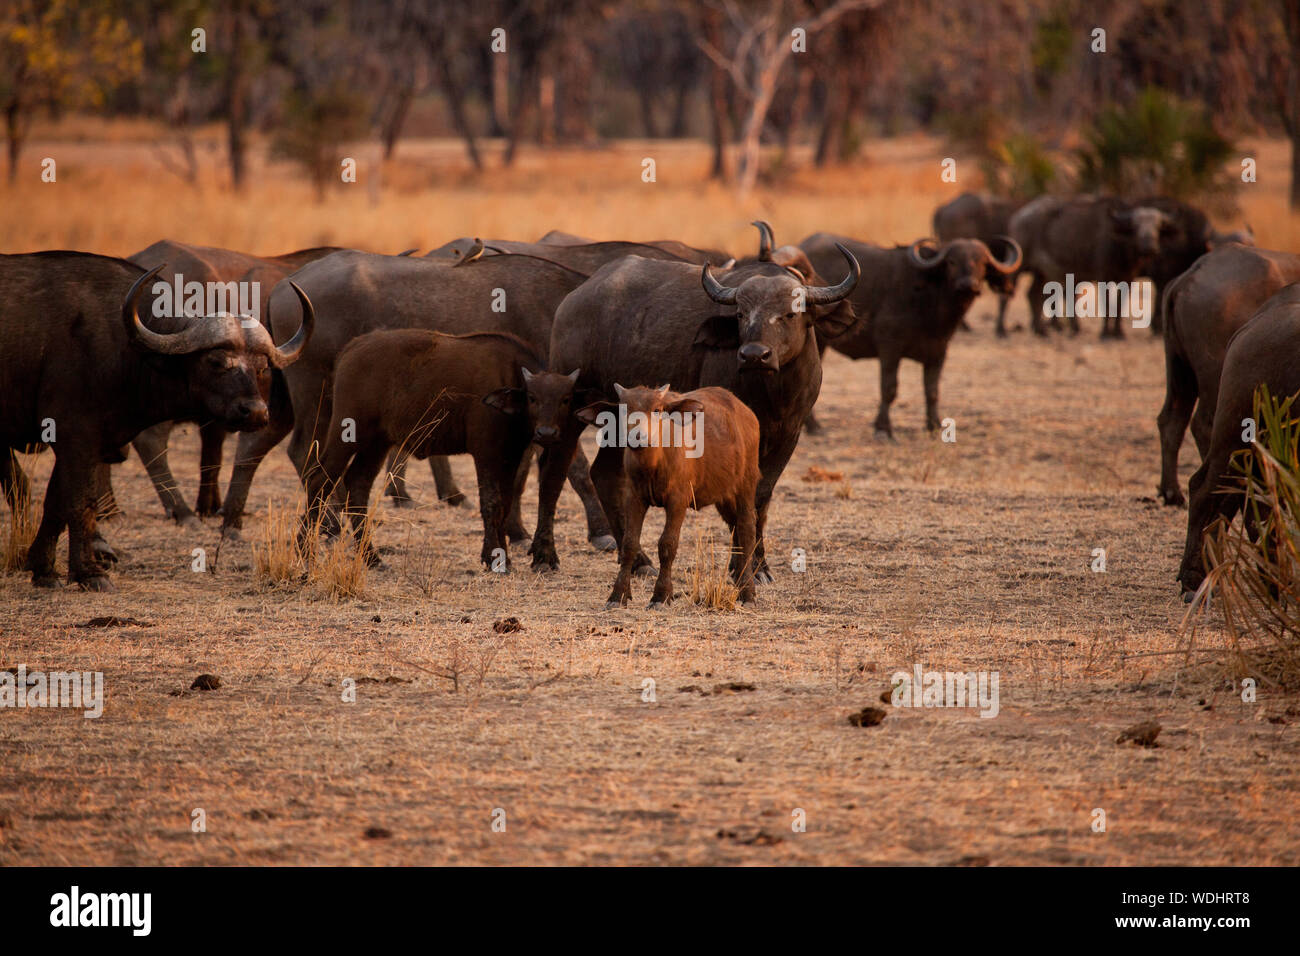 A young calf looks on in a herd of African Cape Buffalo at dusk.  One of the big five and regarded as some of the most dangerous animals in Africa. Stock Photo